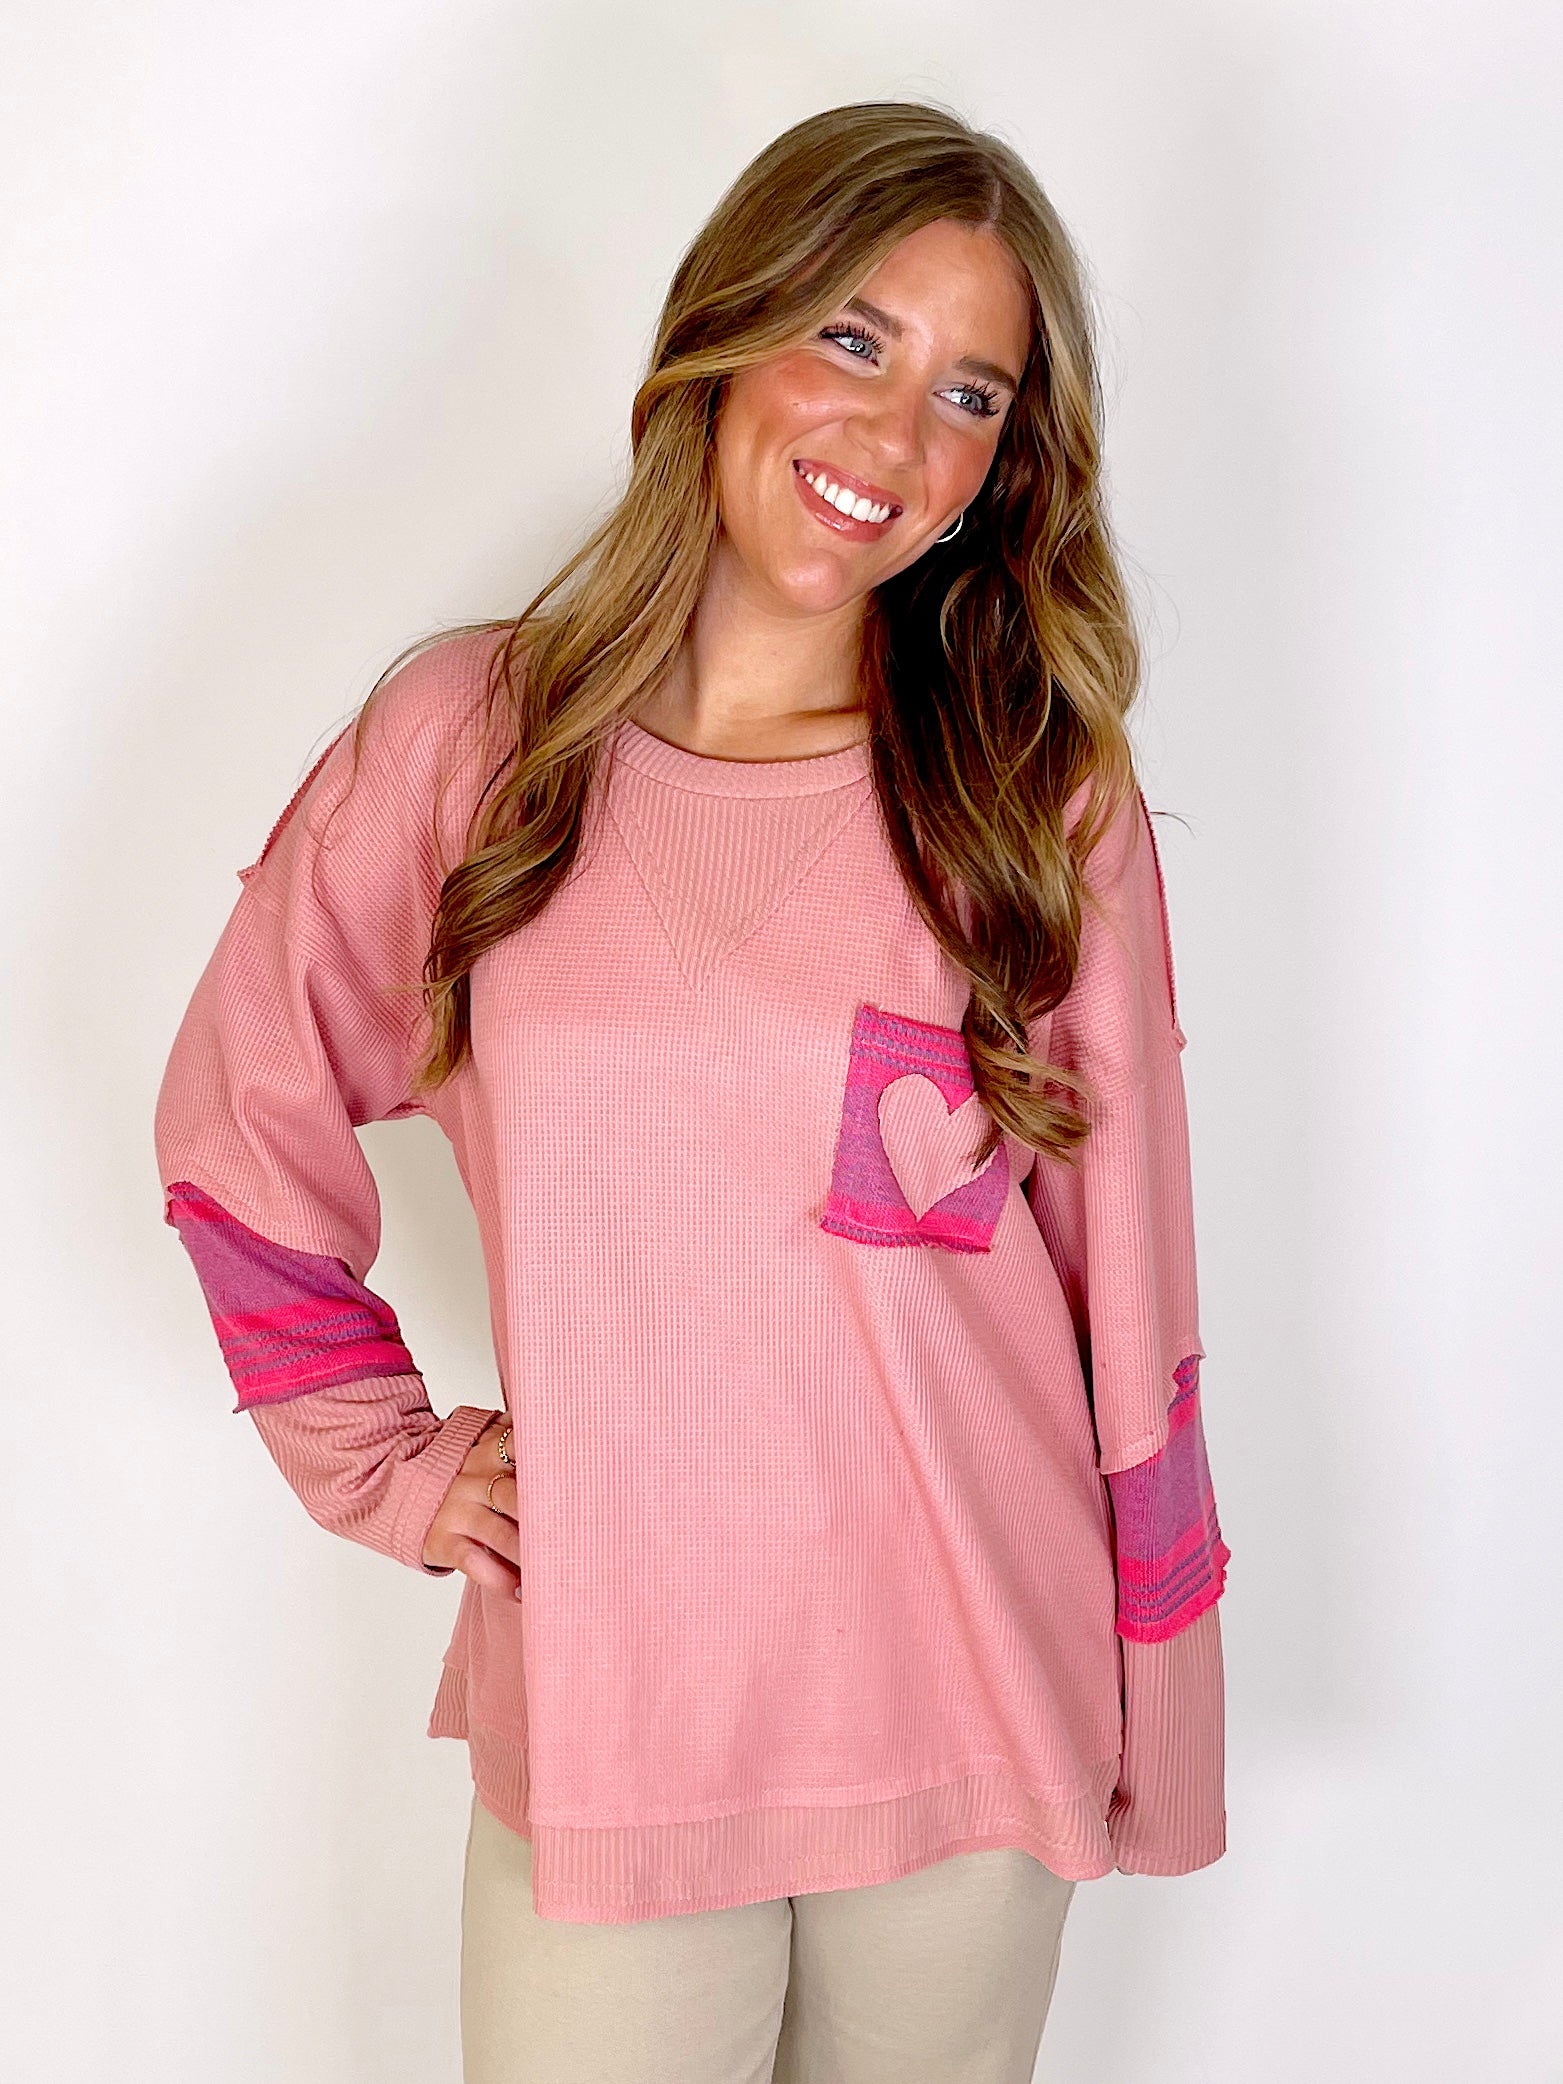 The Bradyn Top-Long Sleeves-Pol-The Village Shoppe, Women’s Fashion Boutique, Shop Online and In Store - Located in Muscle Shoals, AL.